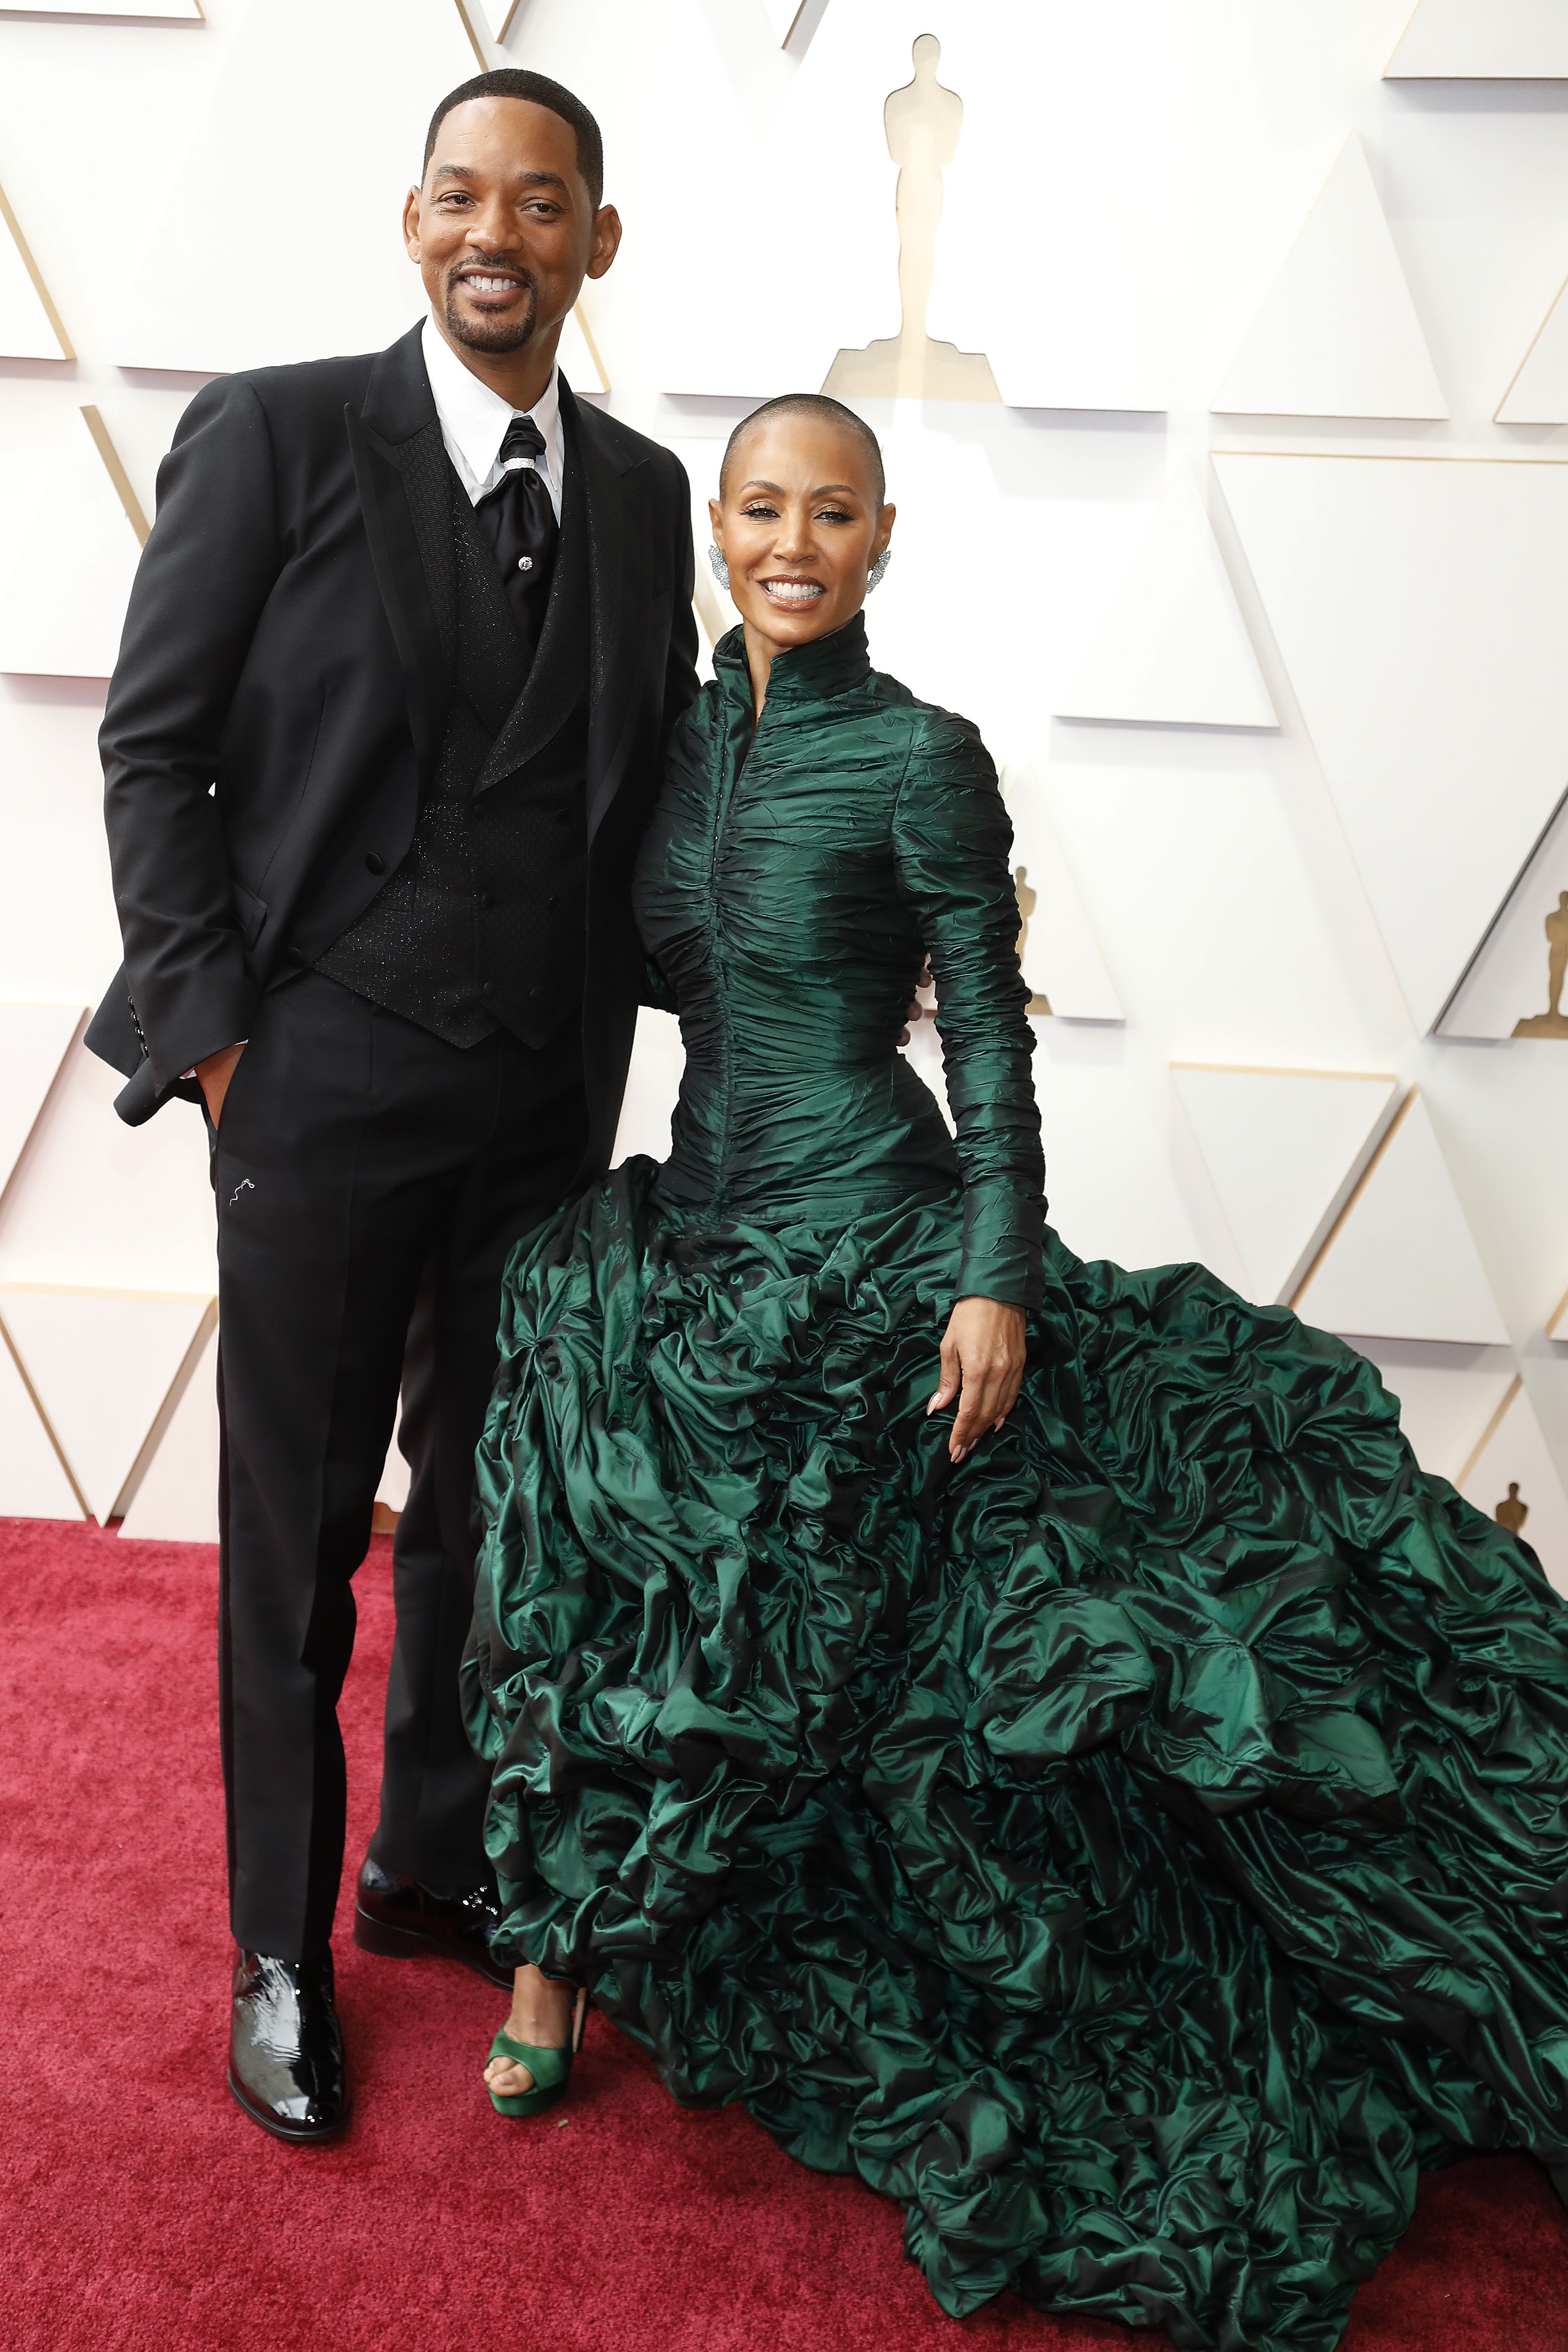 Will Smith, Jada Pinkett Smith arrives on the red carpet outside the Dolby Theater for the 94th Academy Awards in Los Angeles | Source: Getty Images